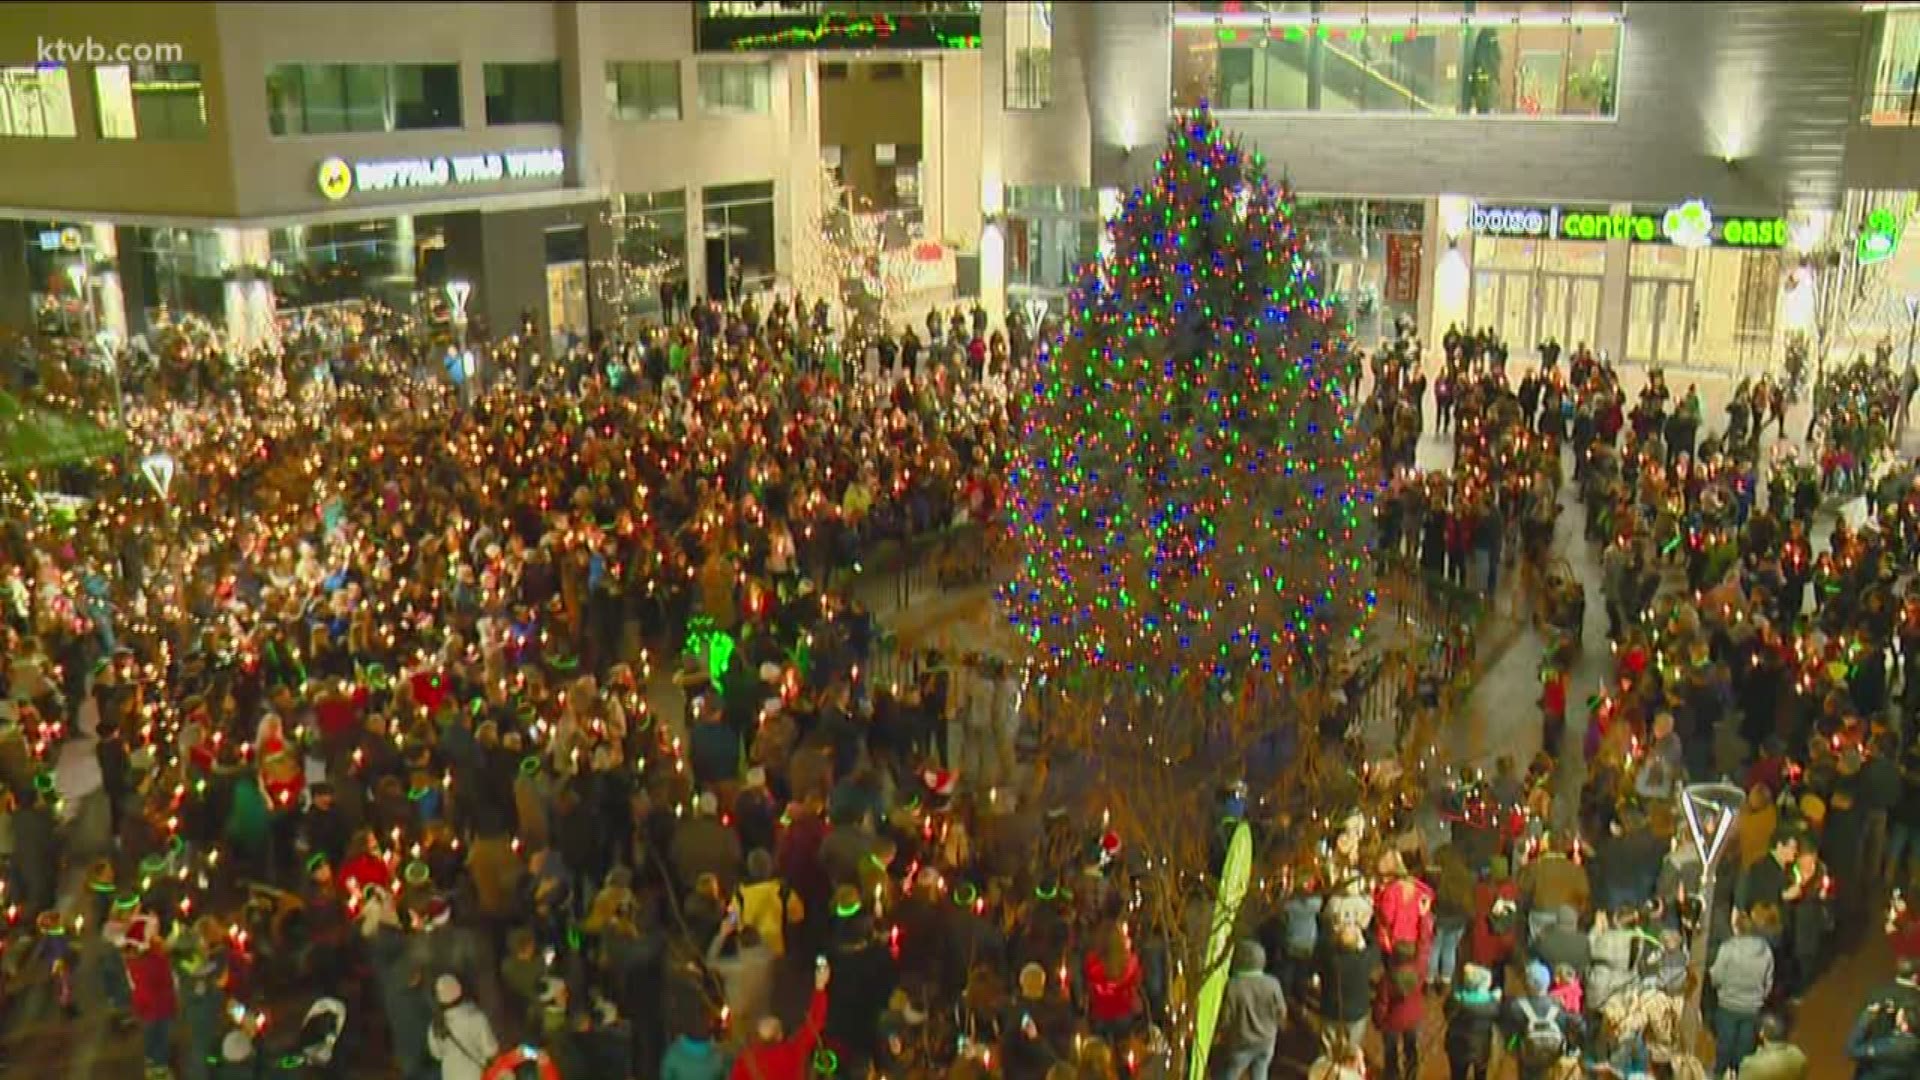 Boise holiday tree lighting ceremony held in The Grove Plaza